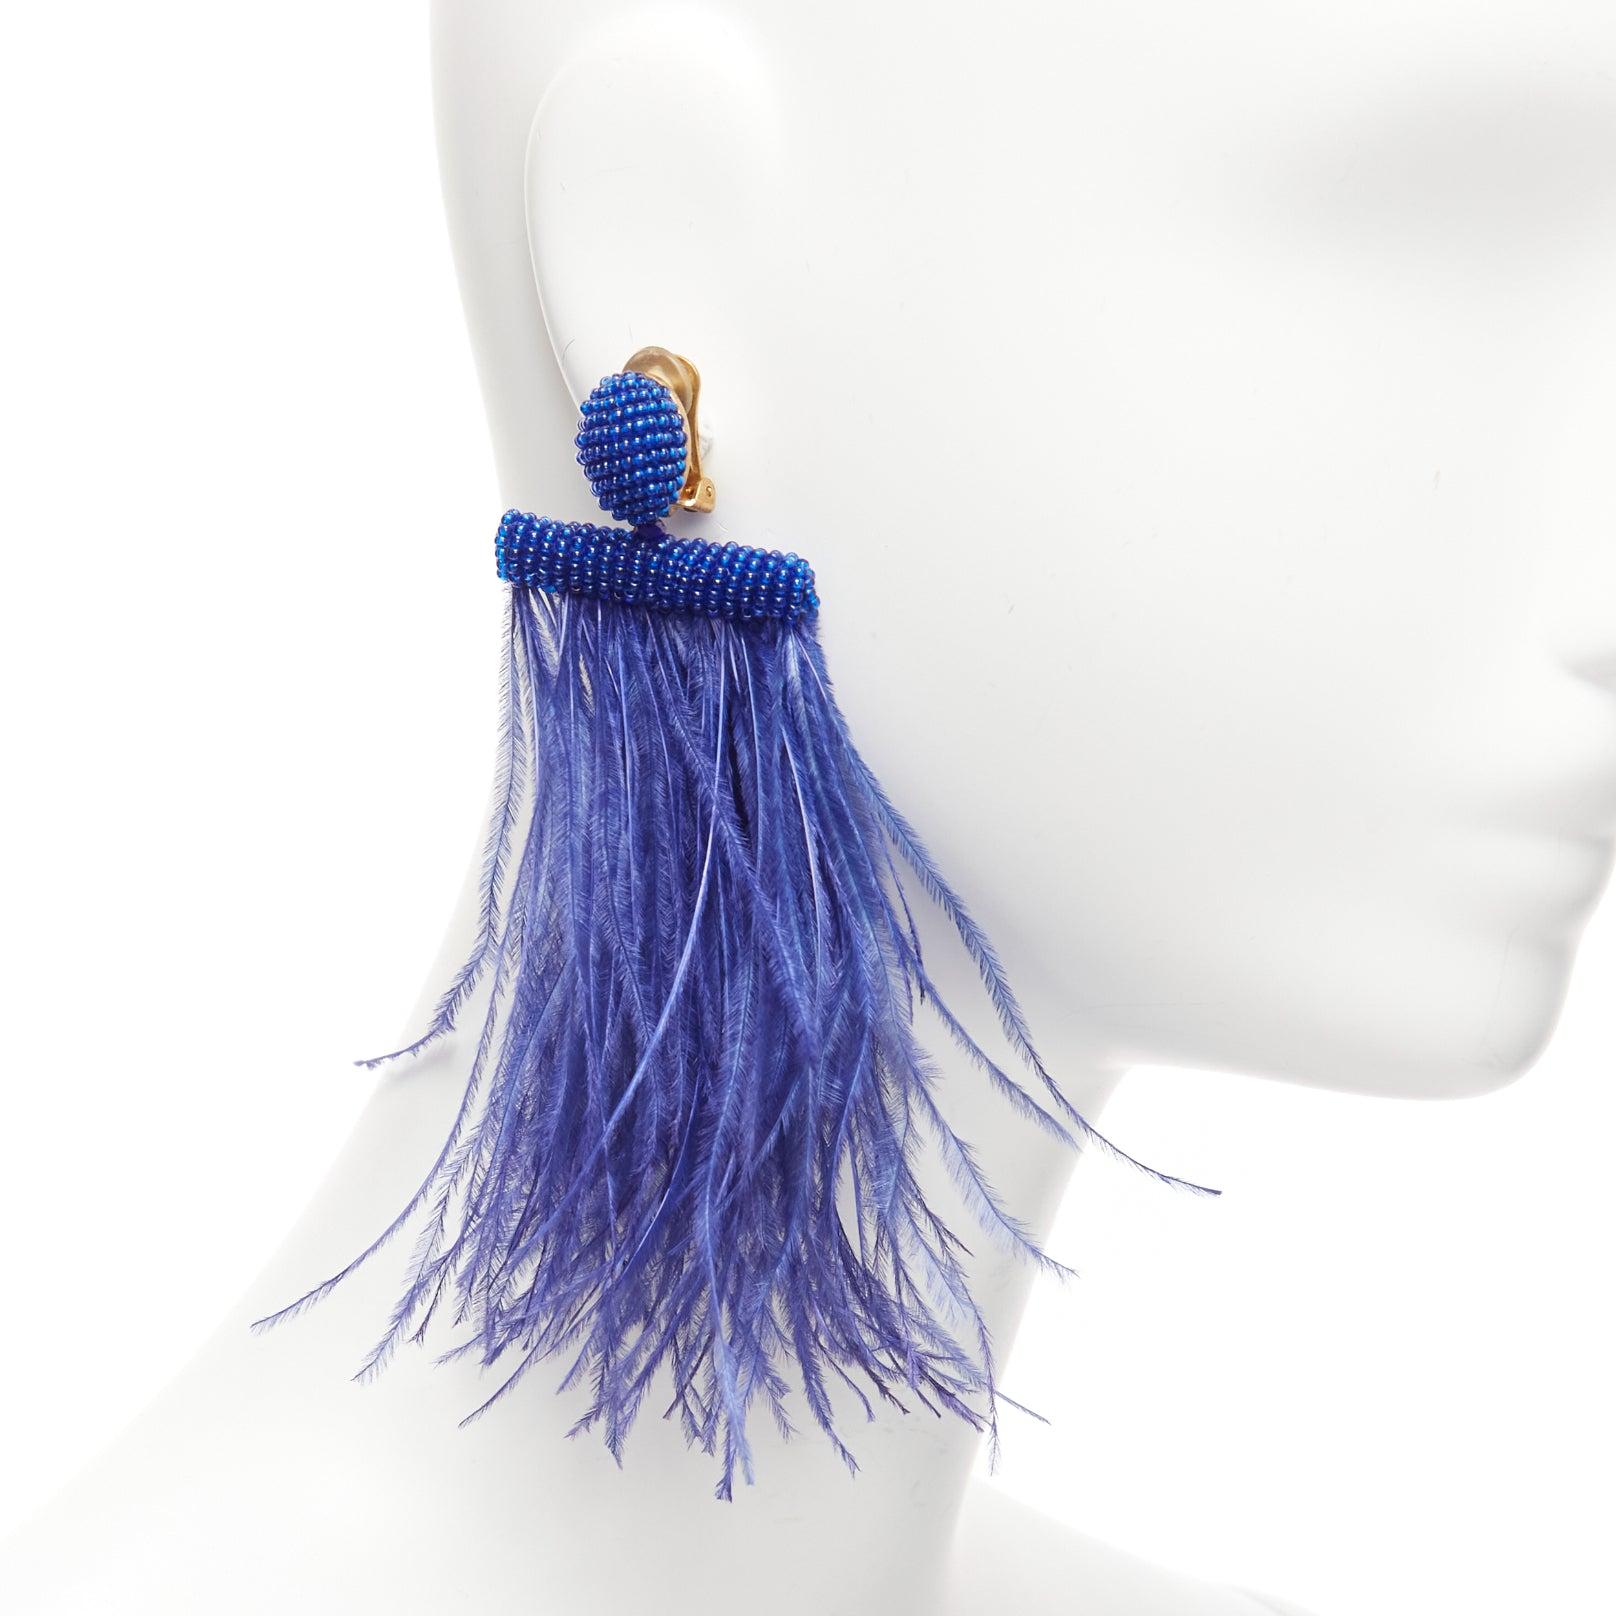 OSCAR DE LA RENTA blue ostrich feather beaded statement clip on earrings pair
Reference: AAWC/A01046
Brand: Oscar de la Renta
Material: Feather, Metal, Acrylic
Color: Blue, Gold
Pattern: Solid
Closure: Clip On
Lining: Gold Metal
Made in: